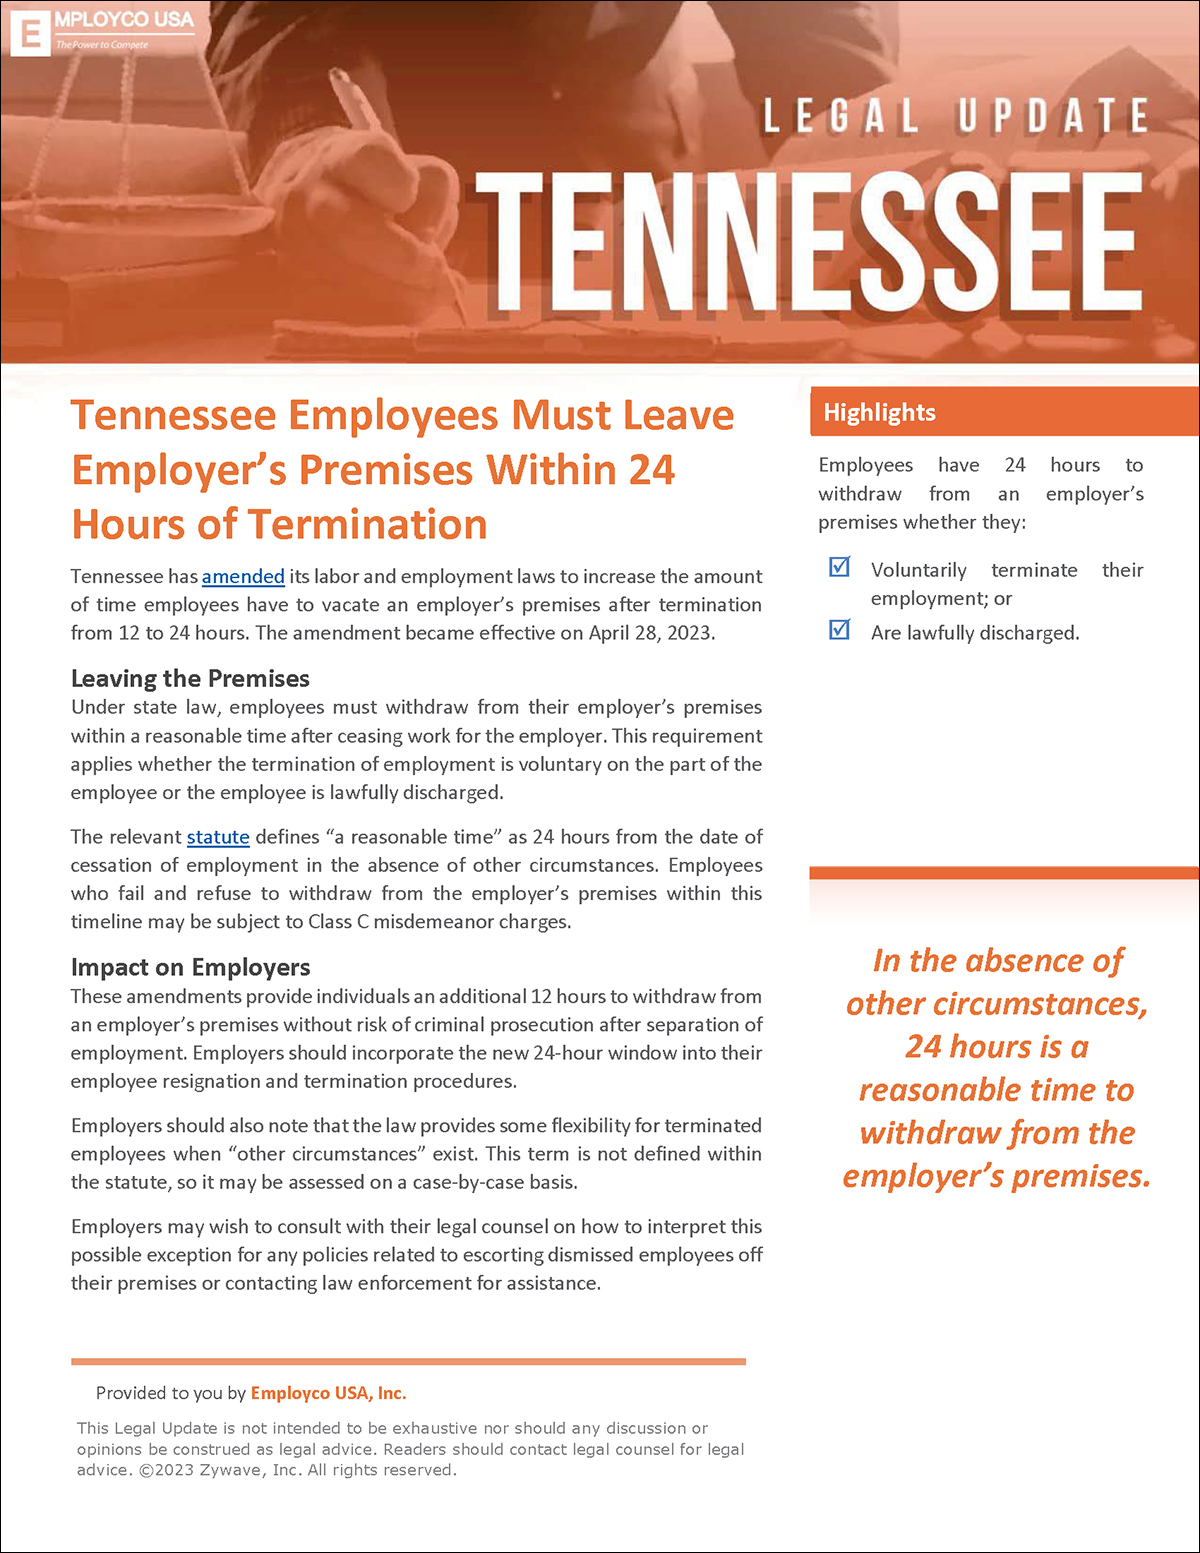 Legal Update: Tennessee